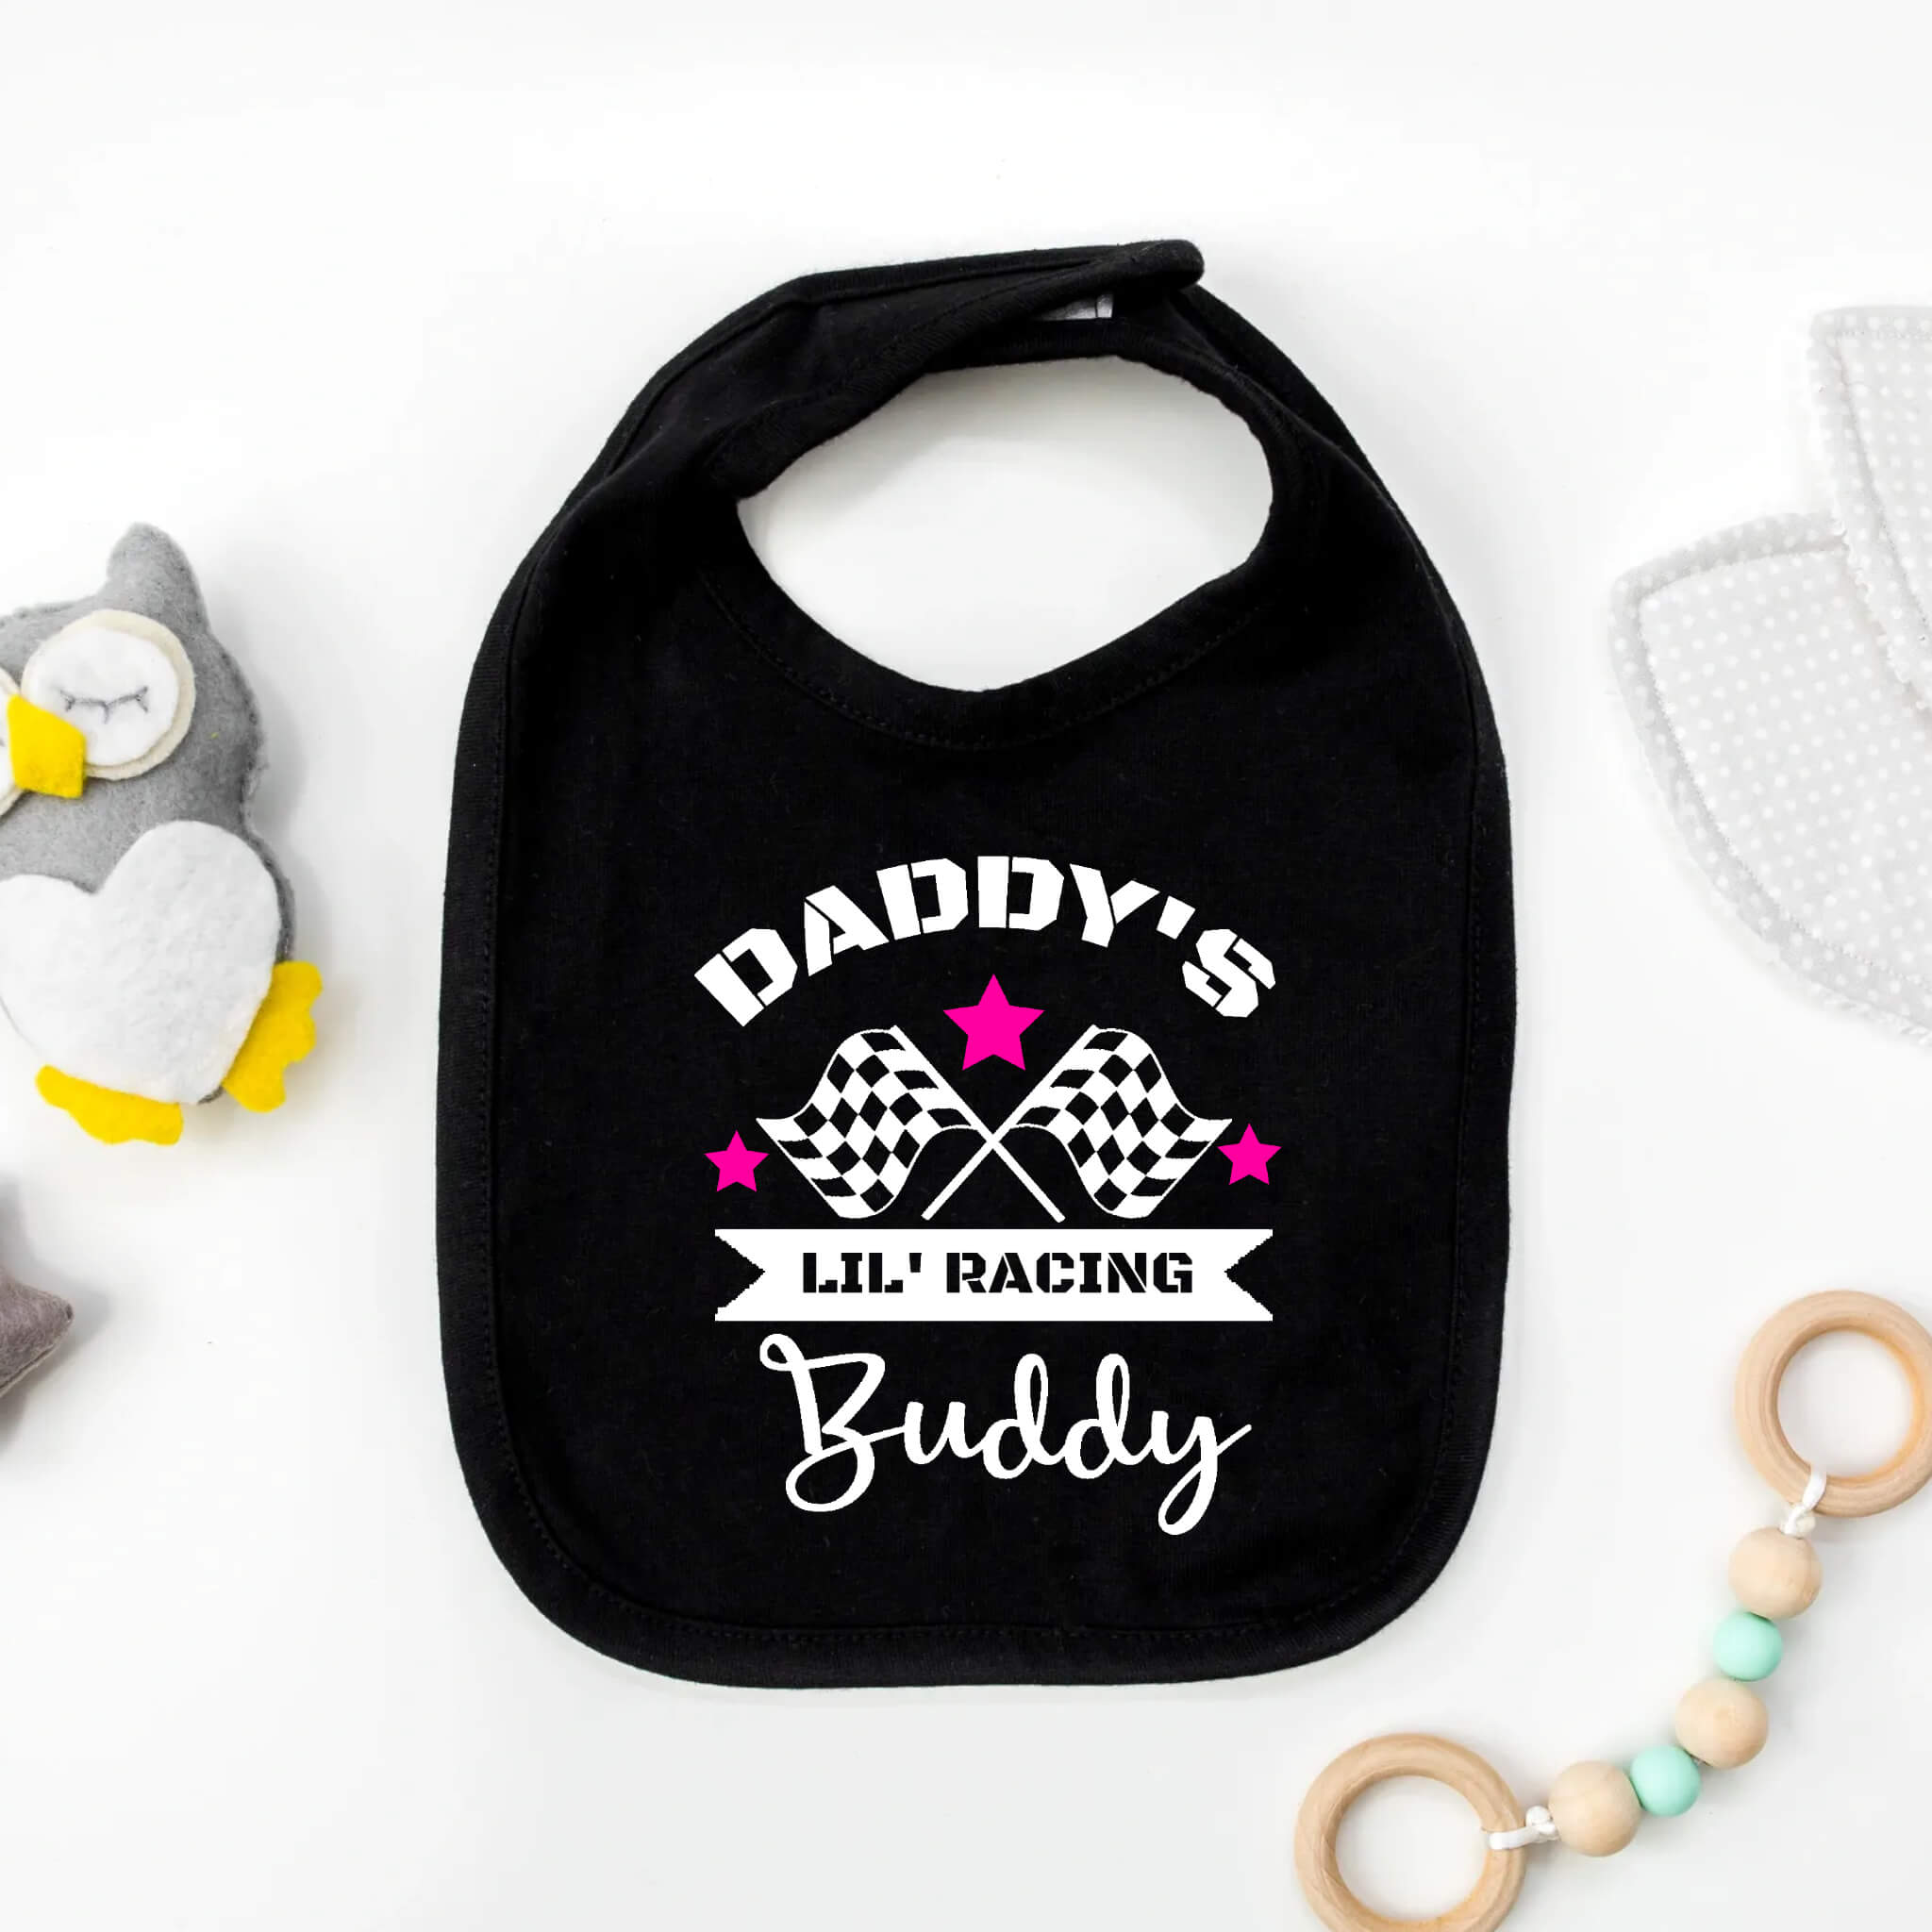 Racing - Daddy's Lil Racing Buddy Customizable Baby Bib One of A Kind Baby Shower Gift